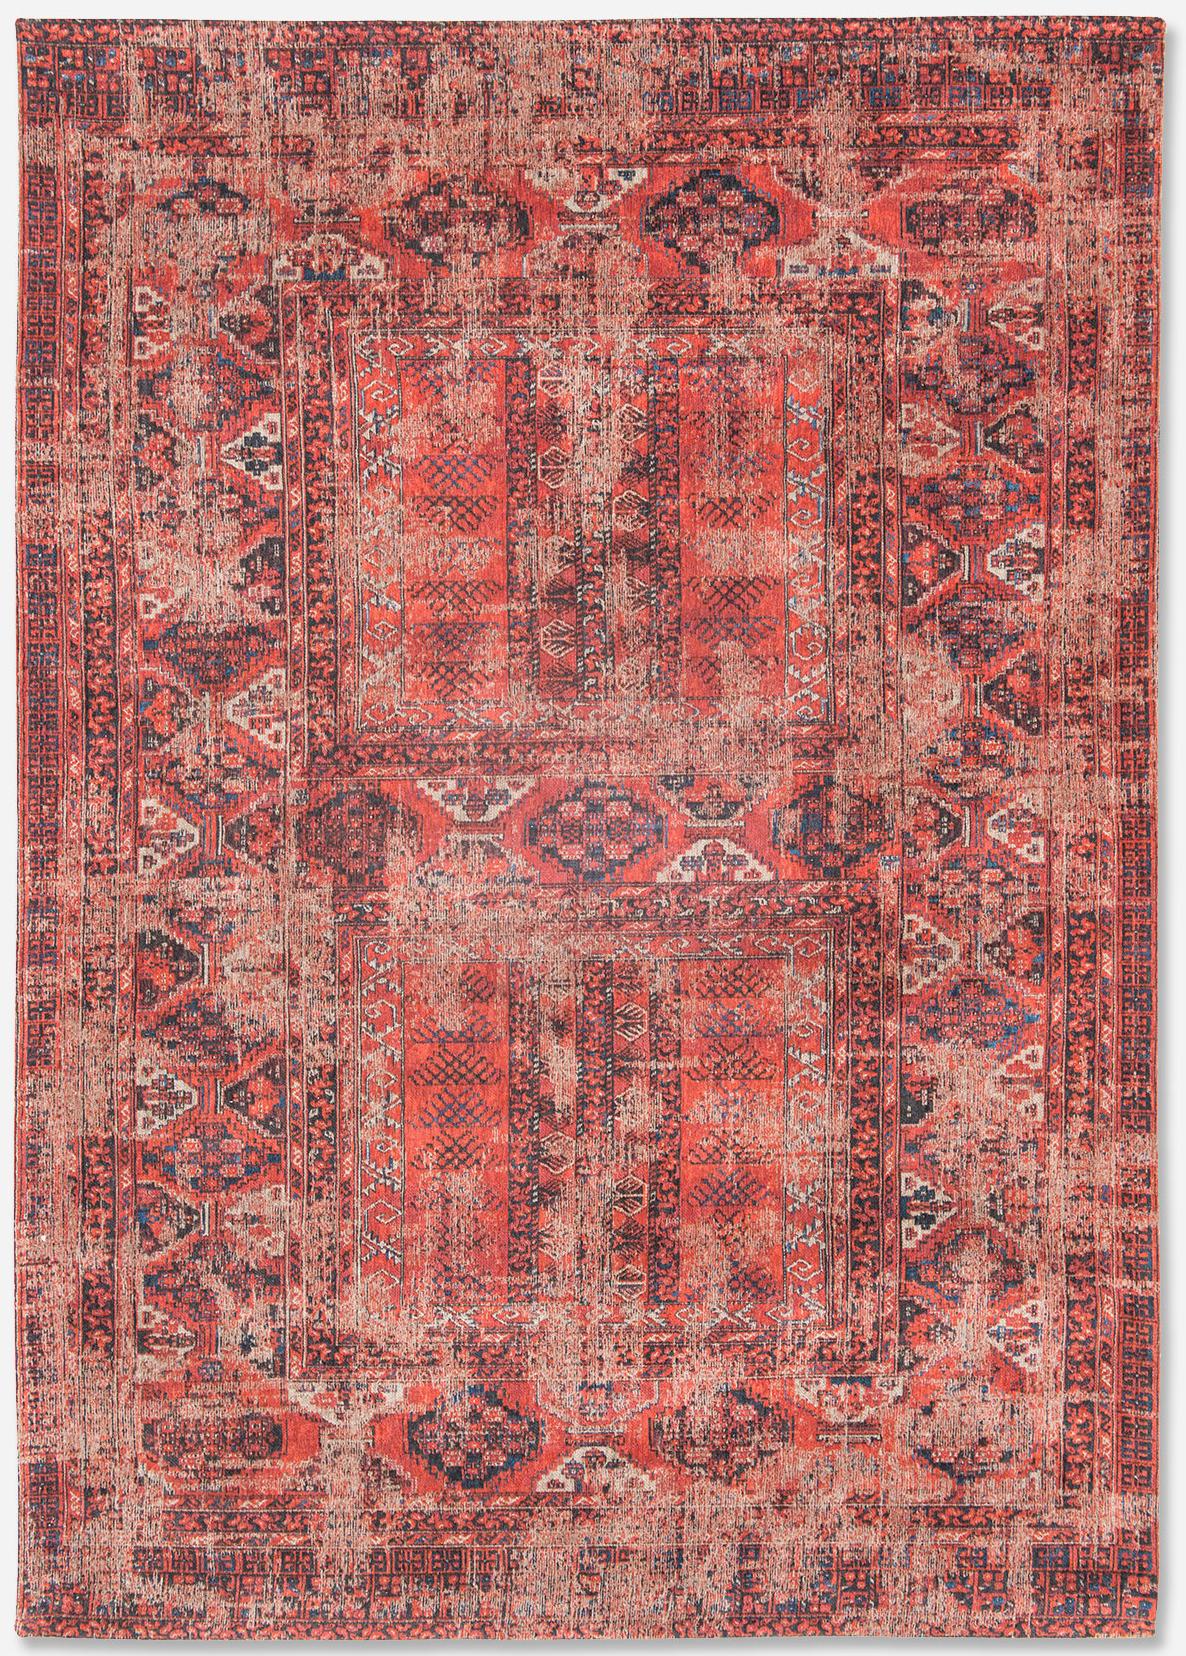 8719 7-8-2 Red Rug ☞ Size: 240 x 340 cm